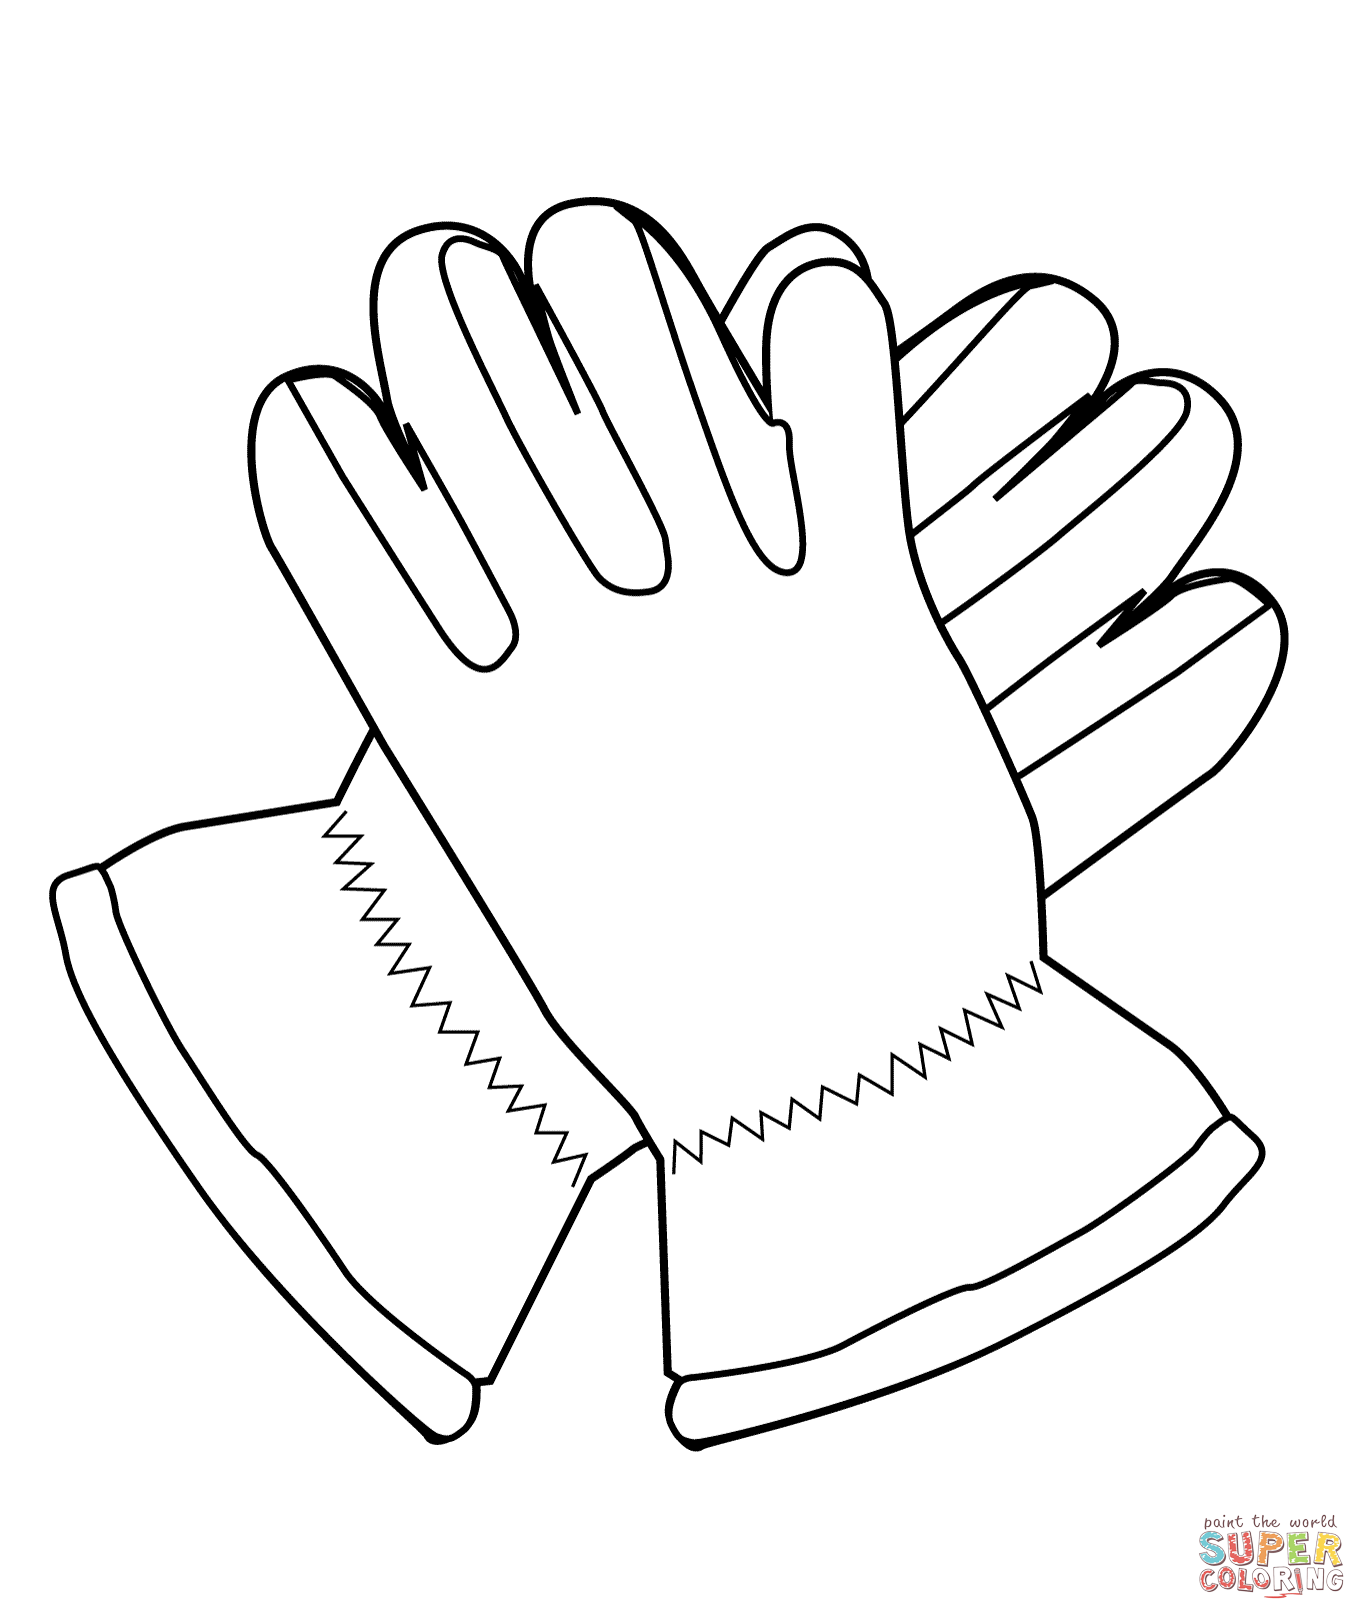 Gloves coloring page | Free Printable Coloring Pages